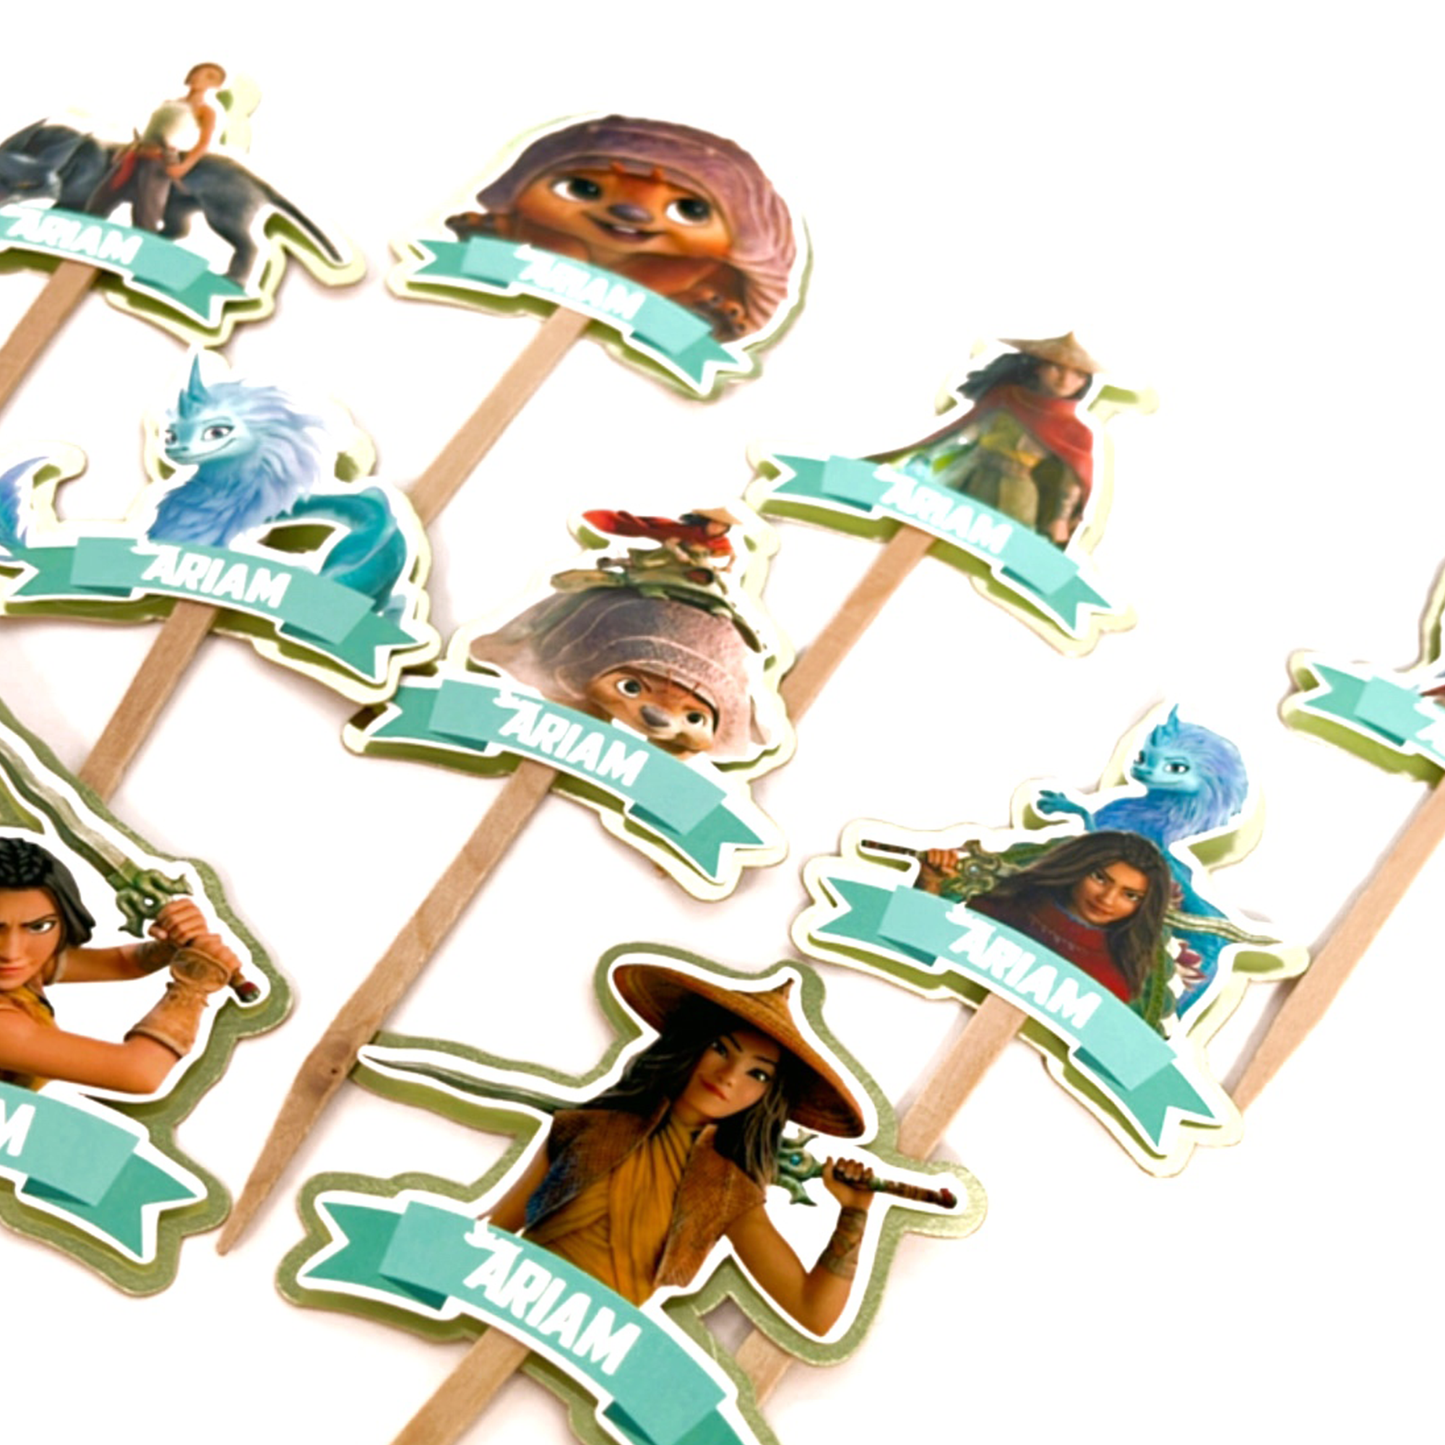 Raya and the last dragon Cupcake Toppers